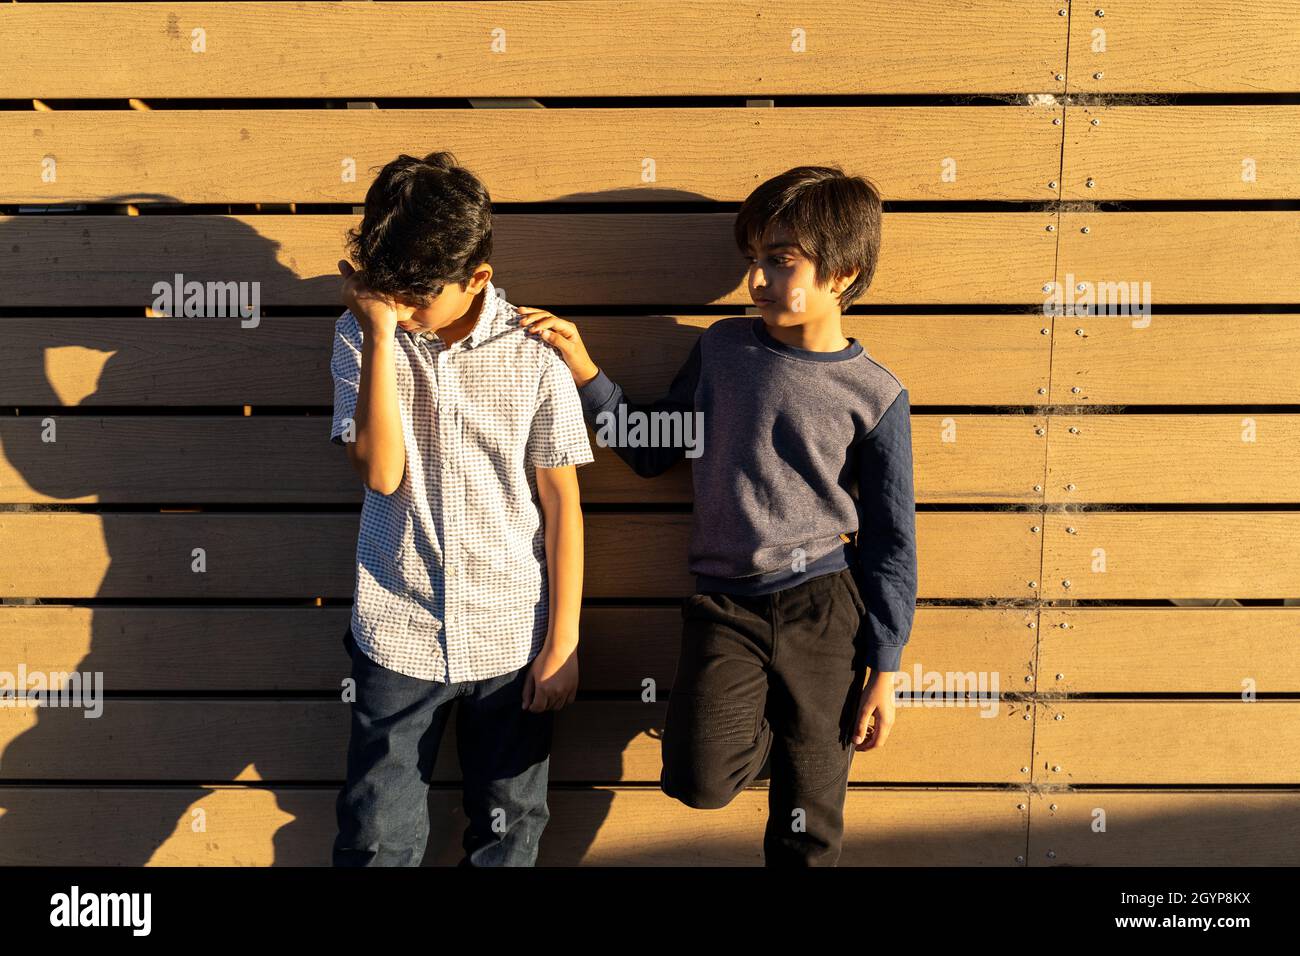 Sad child care. Two friends. Giving help concept. Kid giving Support. Looking after each other. Upset child with hand on face. Hand on shoulder. Stock Photo